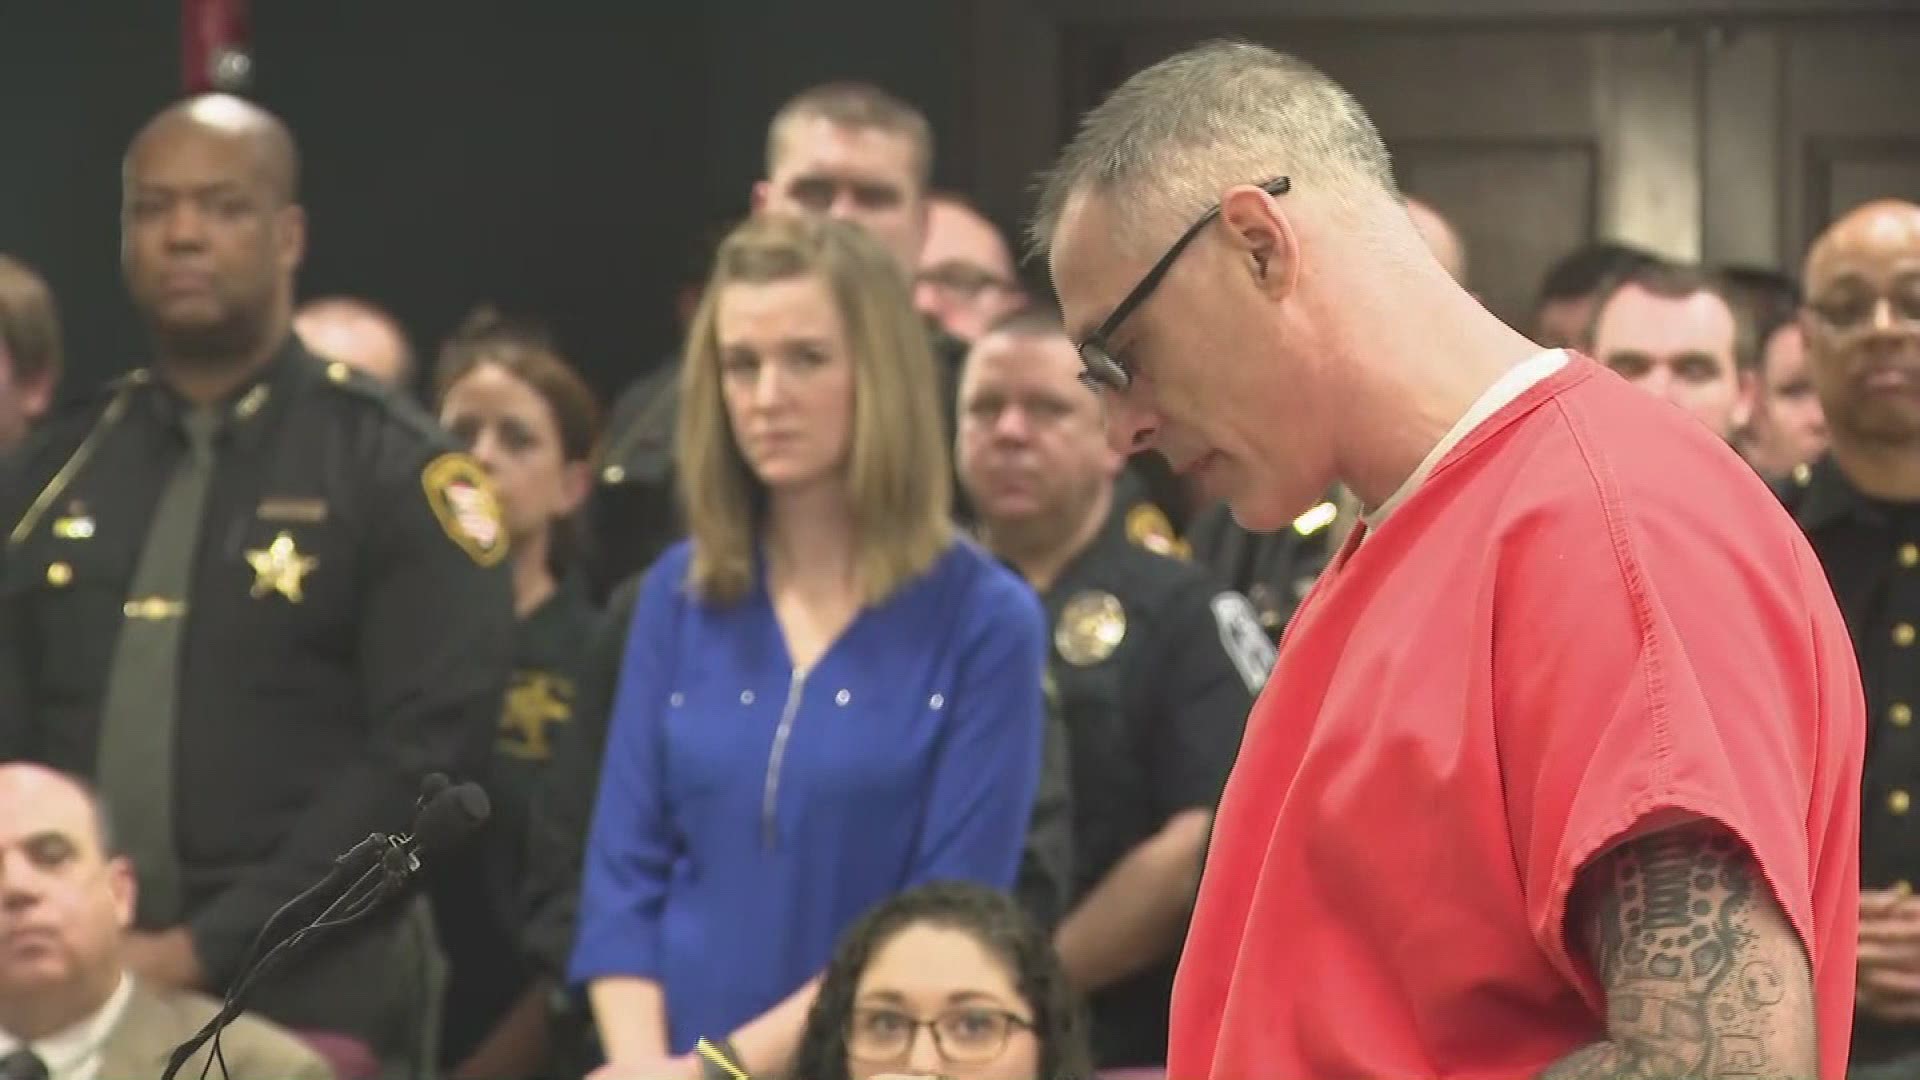 Jay Brannon reads a letter in court prior to his sentencing for setting fire to a Portage County deputy. Brannon pleaded guilty to the charges last week.